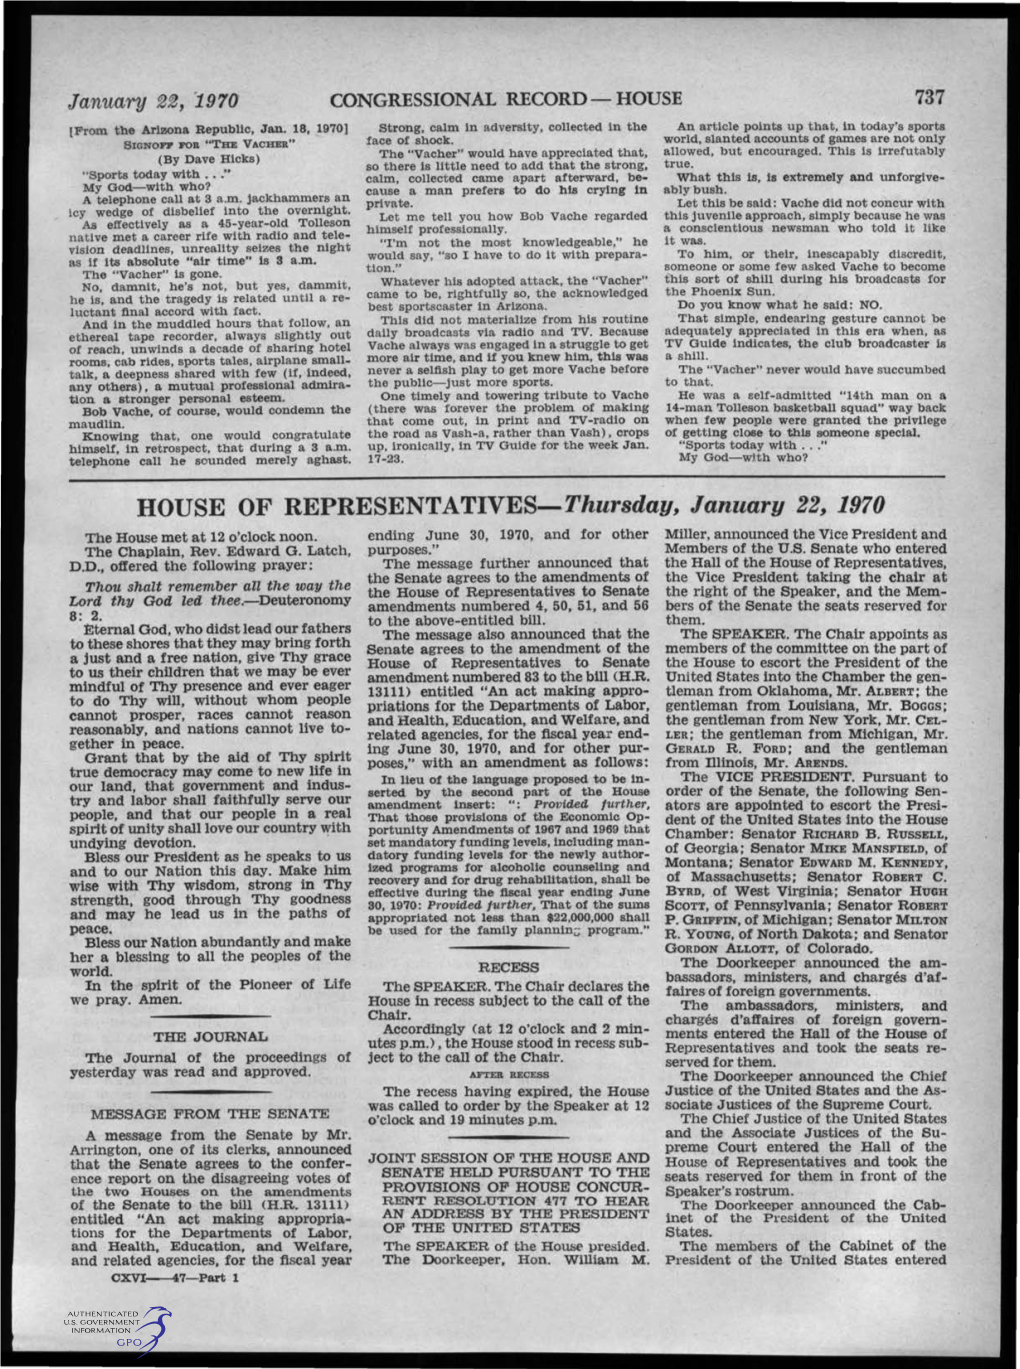 HOUSE of REPRESENTATIVES-Thursday, January 22, 1970 the House Met at 12 O'clock Noon